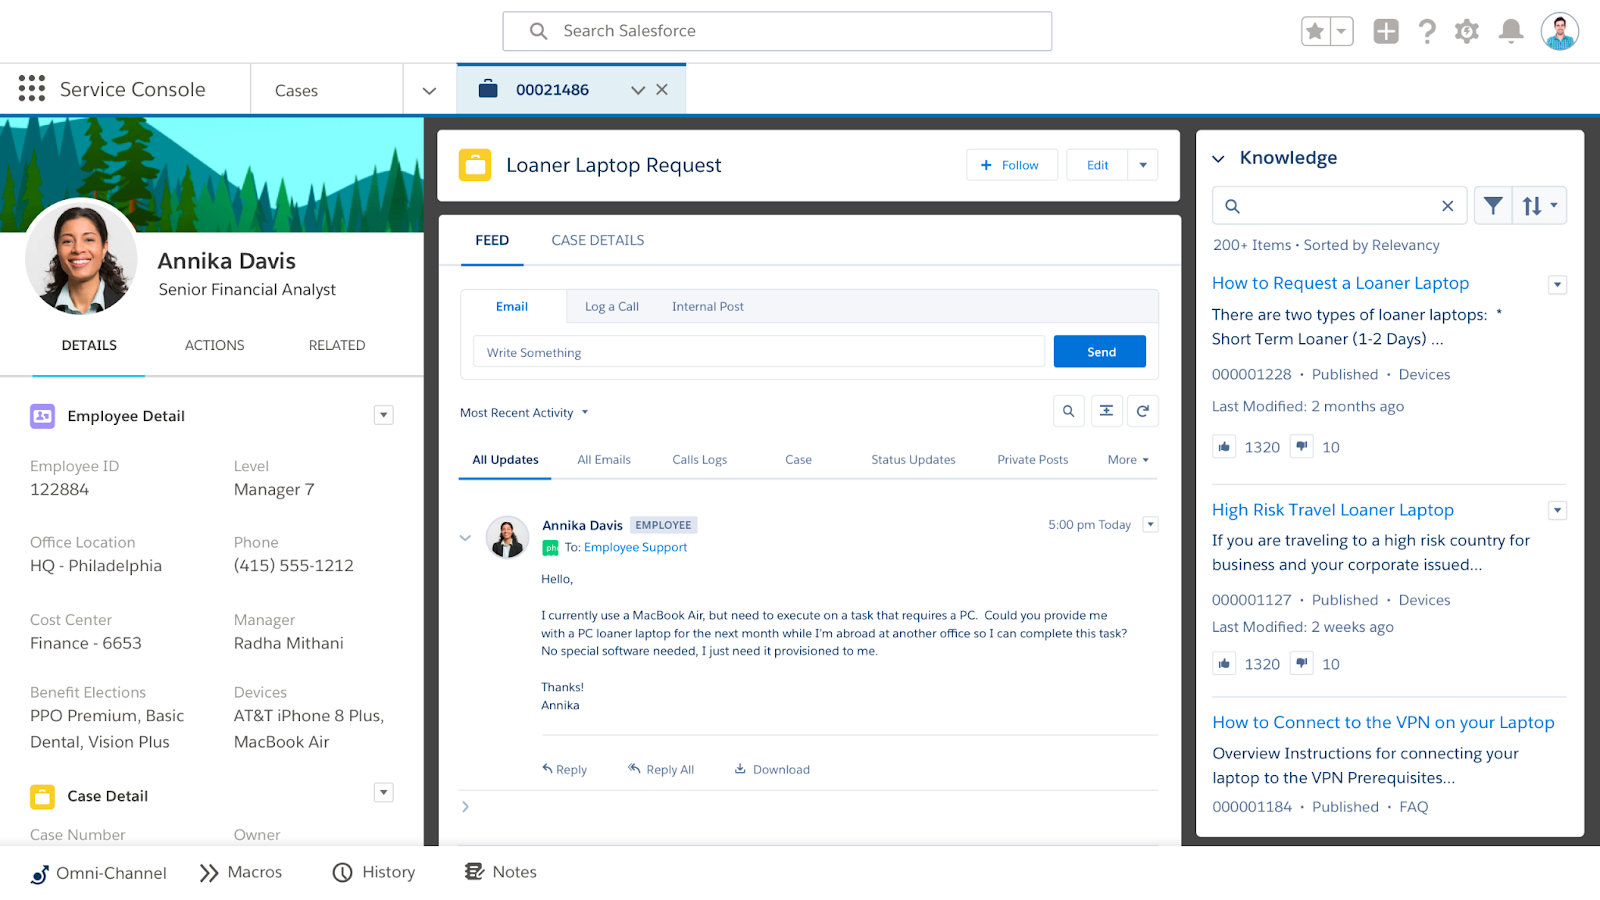 Reimagine service with trusted AI with Salesforce